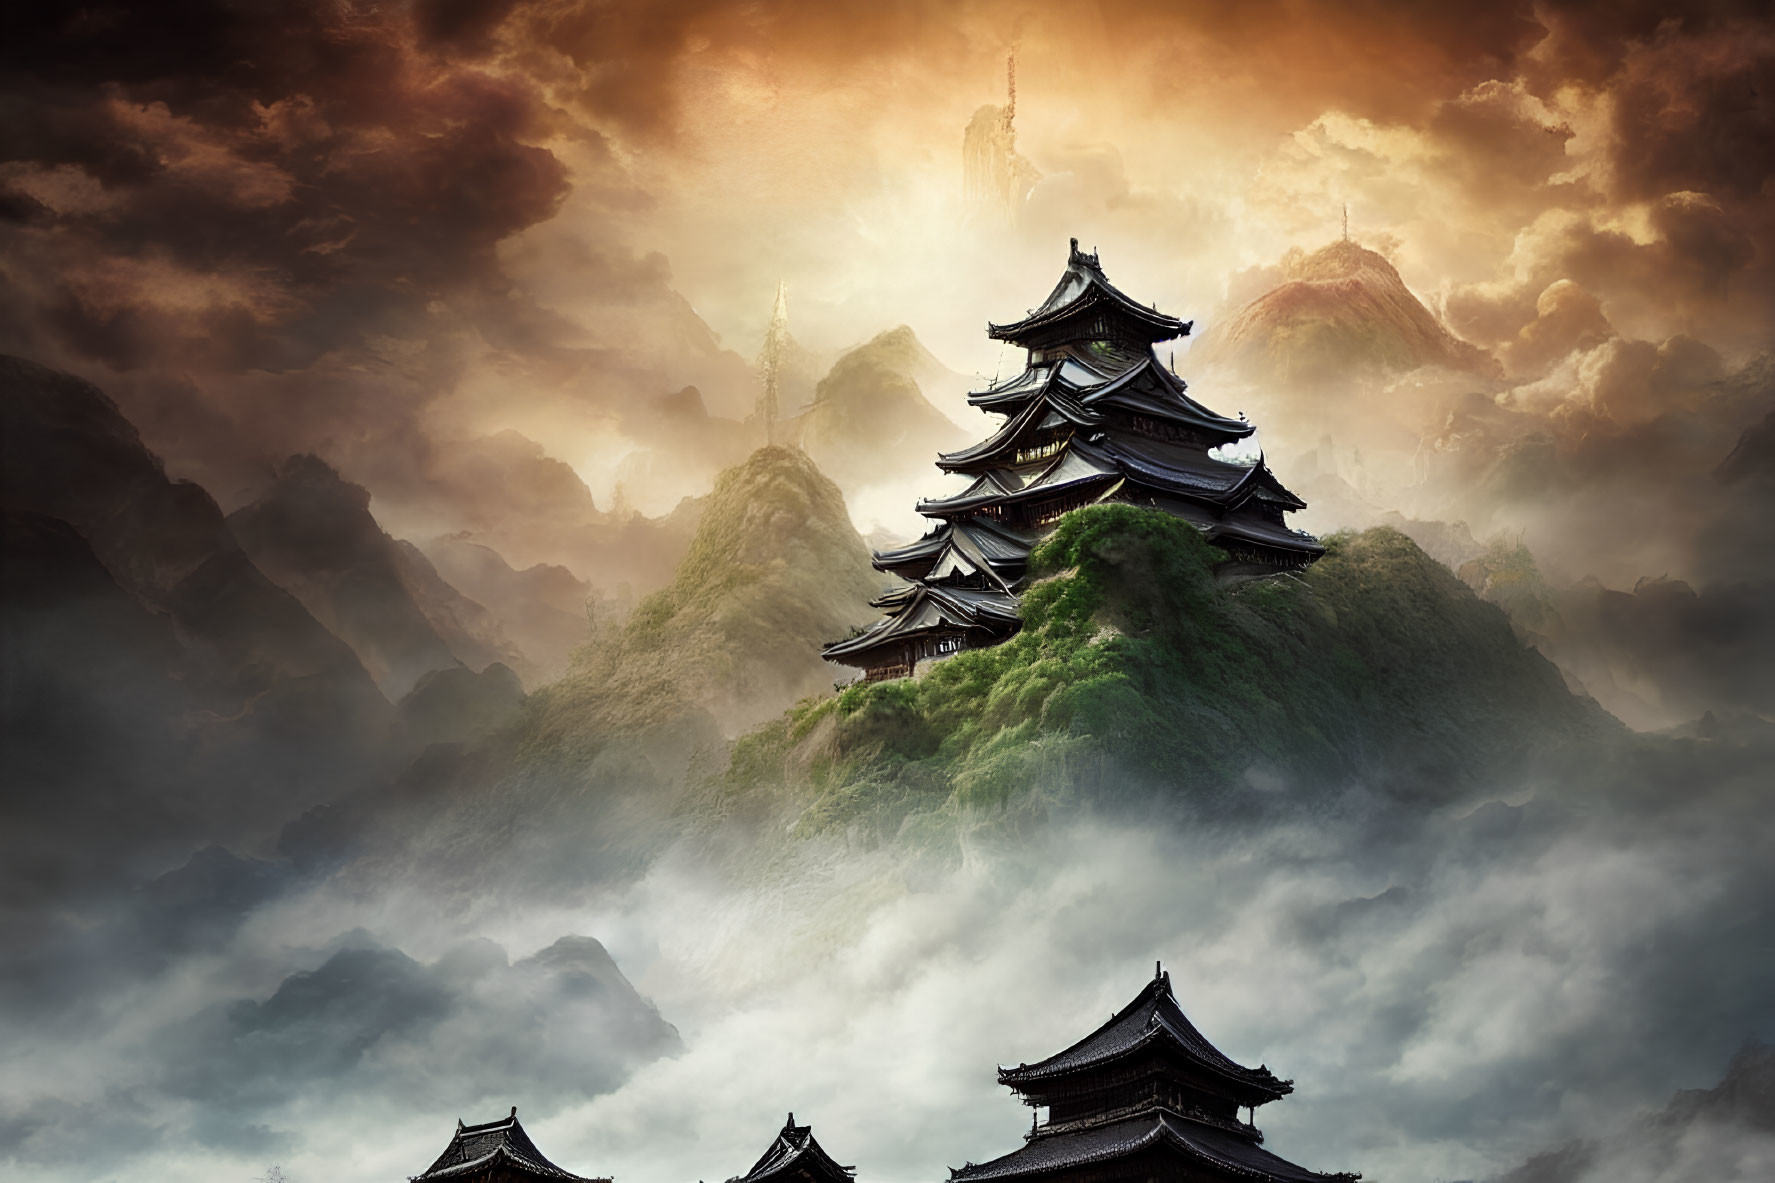 Japanese Castle on Misty Mountain with Dramatic Cloudy Sky